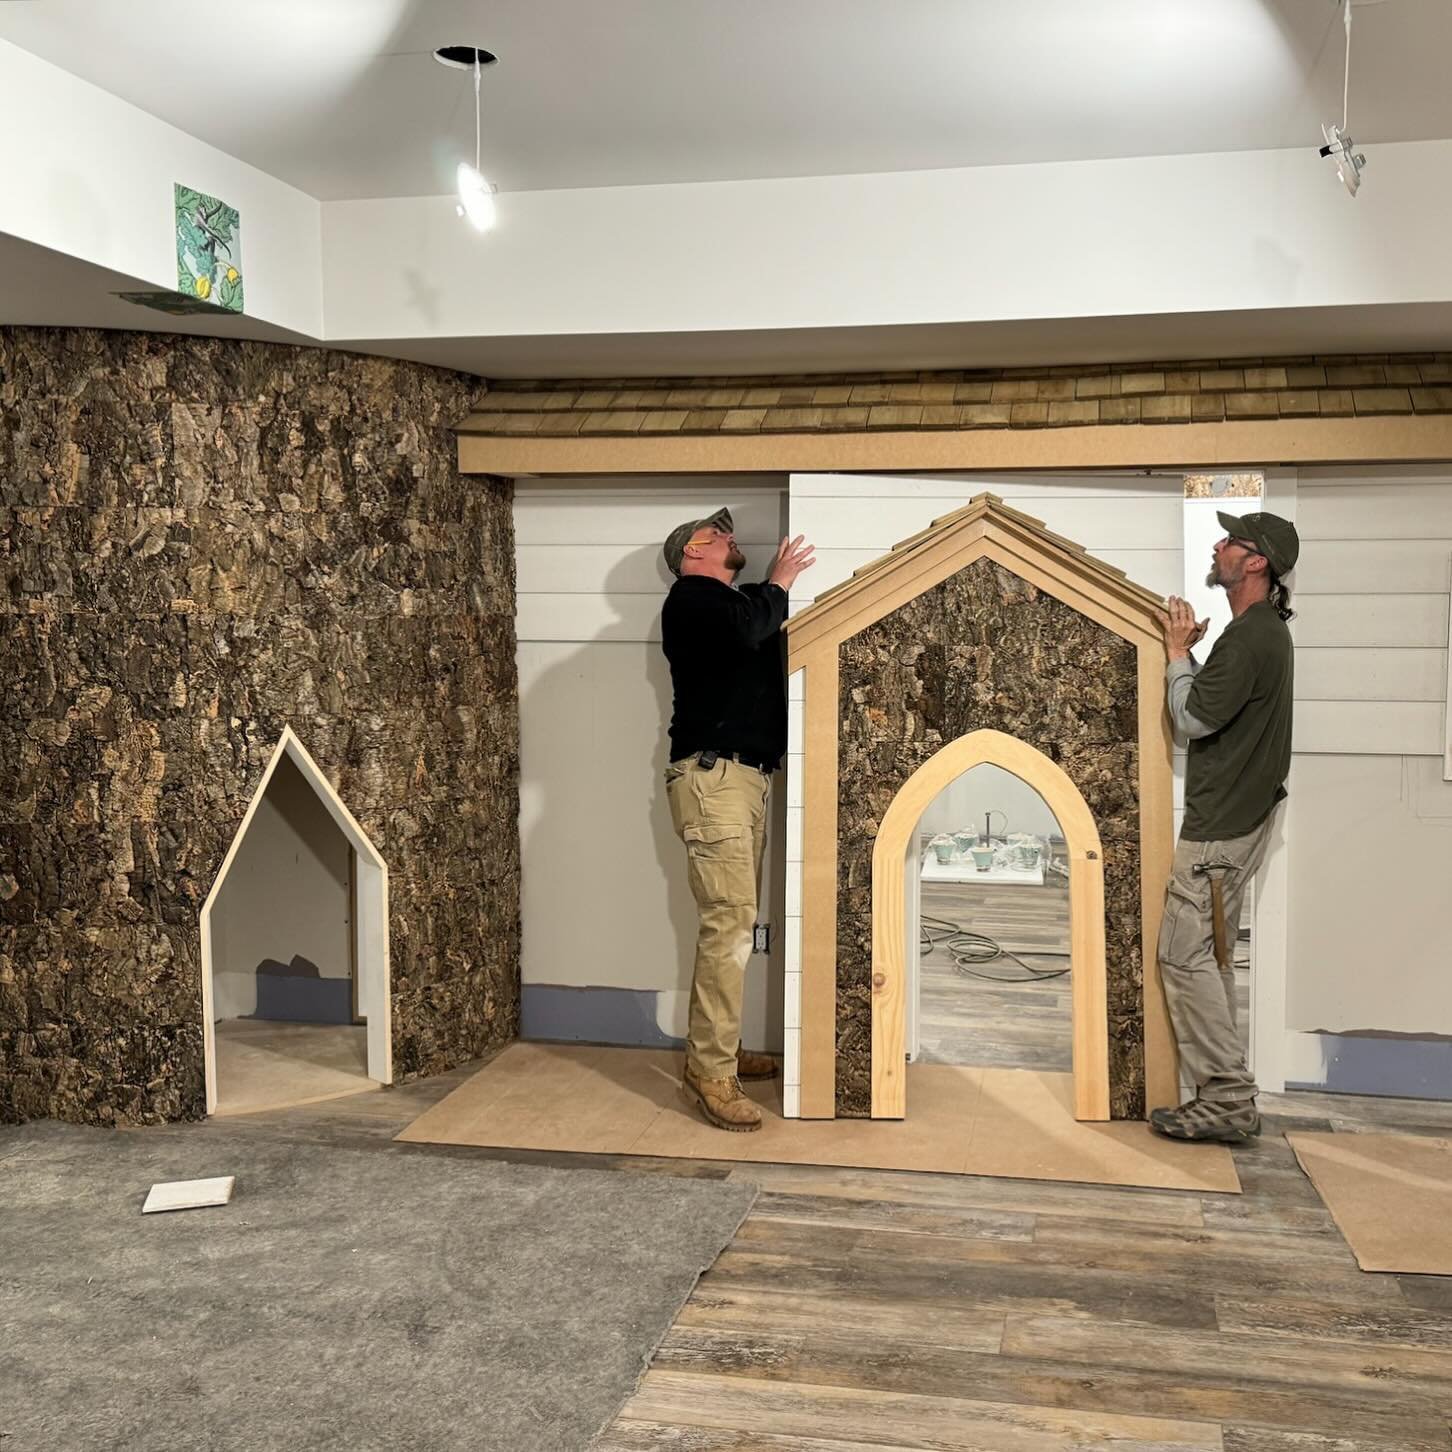 We&rsquo;re bringing an indoor tree house to life&hellip;RCQ style ✨. The magic and wonder in store for this playroom has us seriously wishing we were kids again!

#RCQDesign #DesignNJ #NJInteriorDesigners